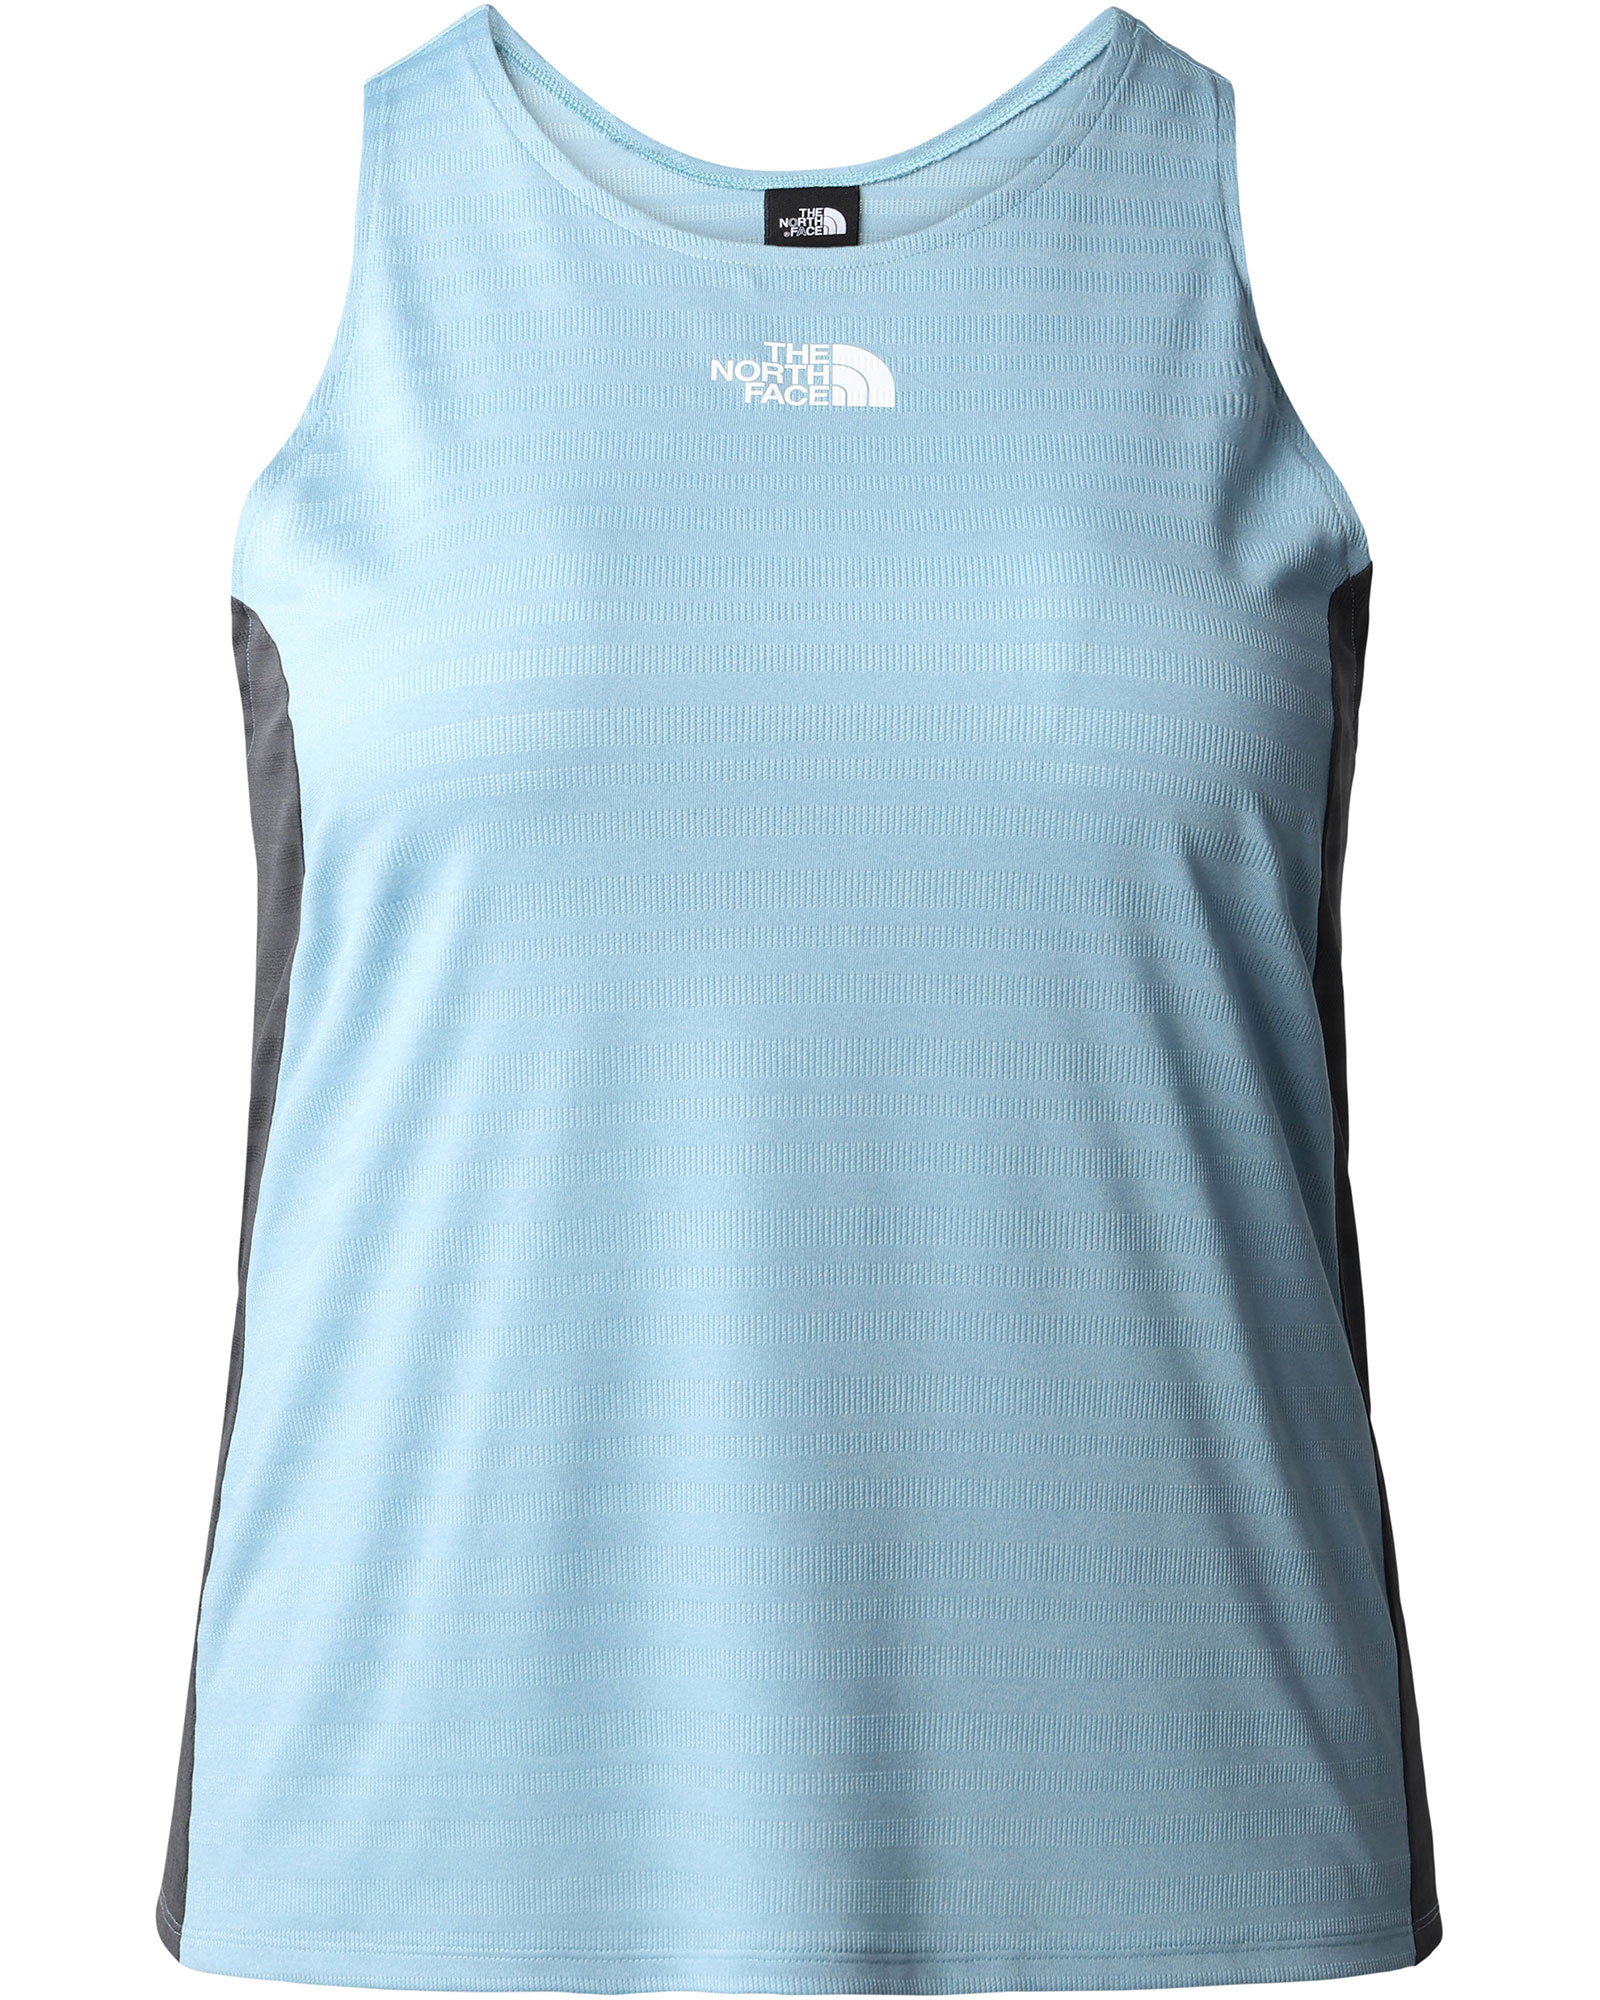 The North Face Women’s Plus MA Tank - Reef Waters 2X